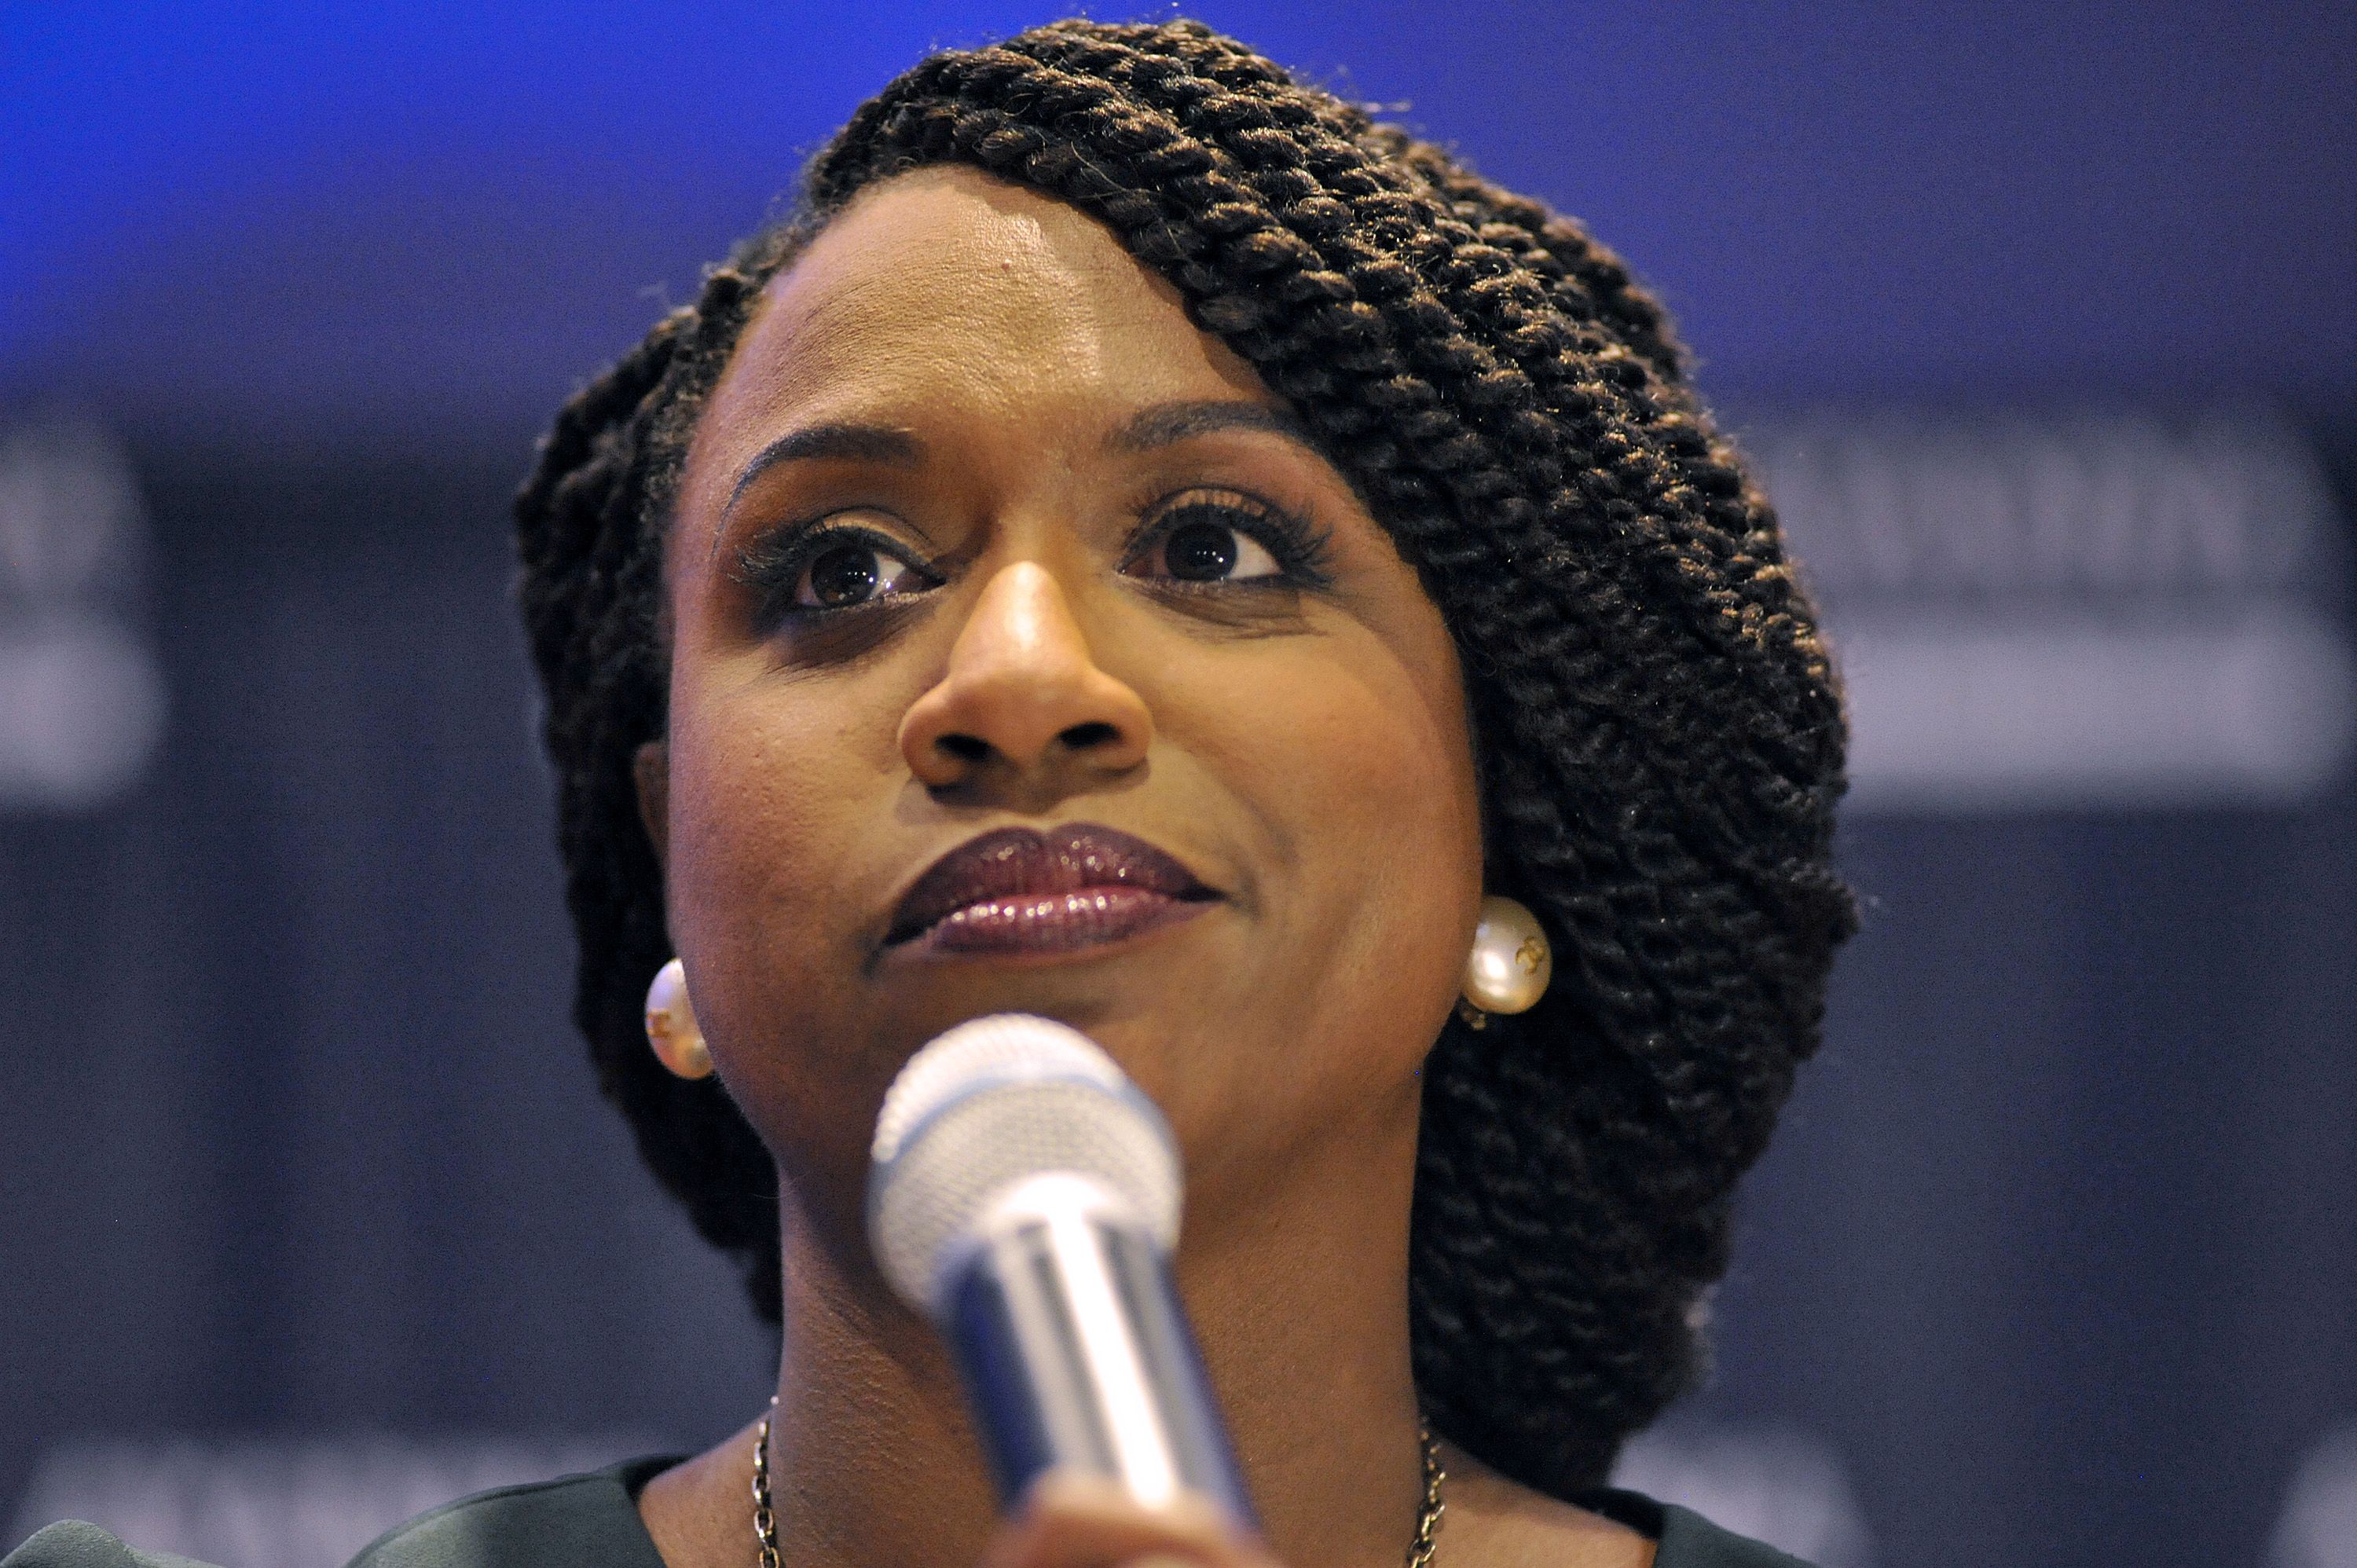 Ayanna Pressley, Boston City Council member and Democratic candidate for congress, delivers her victory speech at the IBEW Local 103 in Dorchester, Massachusetts, on September 4, 2018. Pressley declined to endorse a candidate in the 2020 Senate primary in her home state. (Joseph Prezioso —AFP/Getty Images)